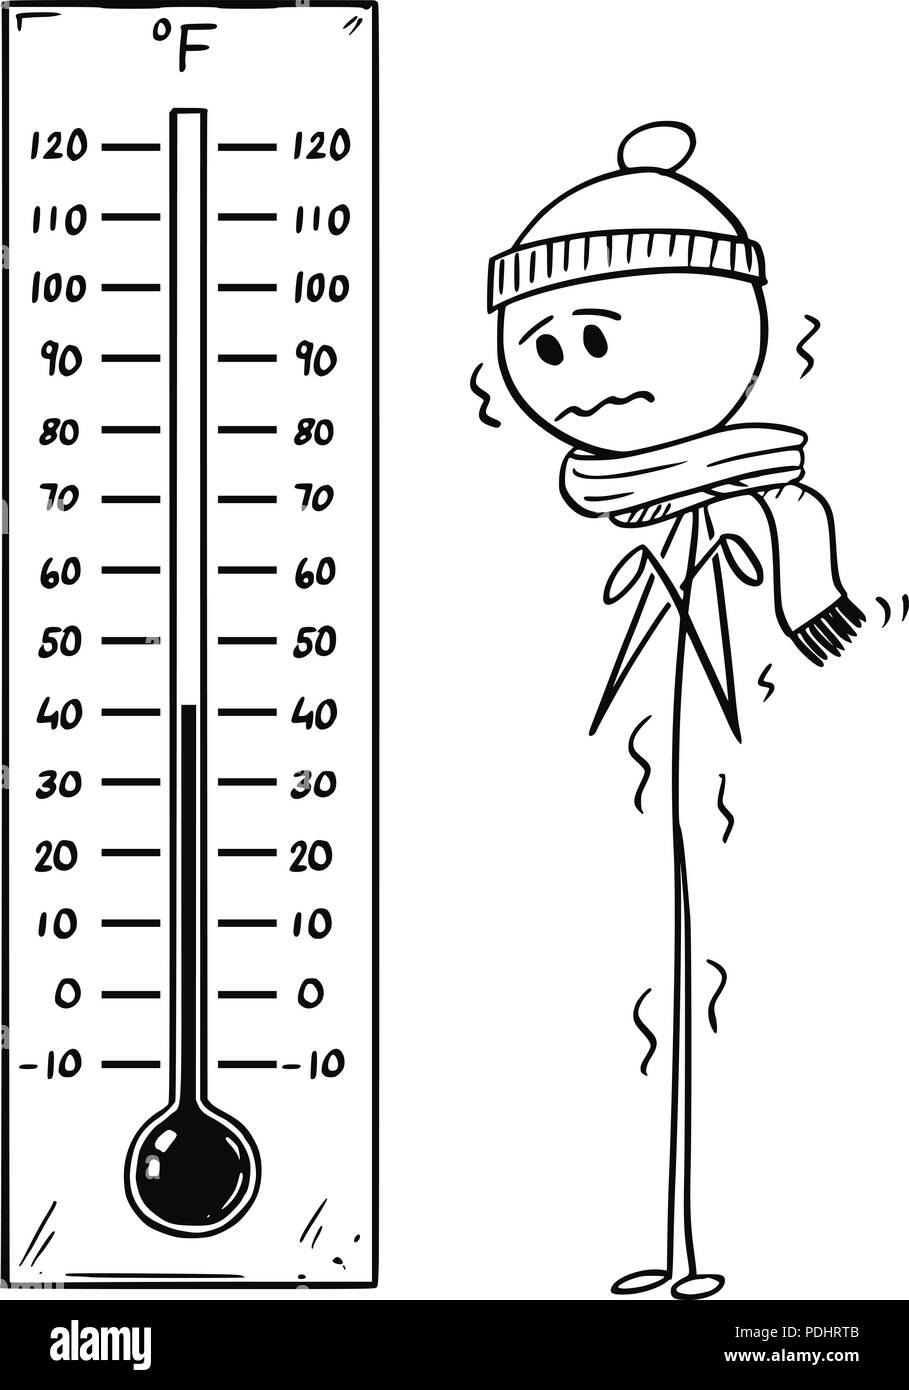 Cartoon of Chilled Man Looking at Big Fahrenheit Thermometer Showing Low Temperature Stock Vector